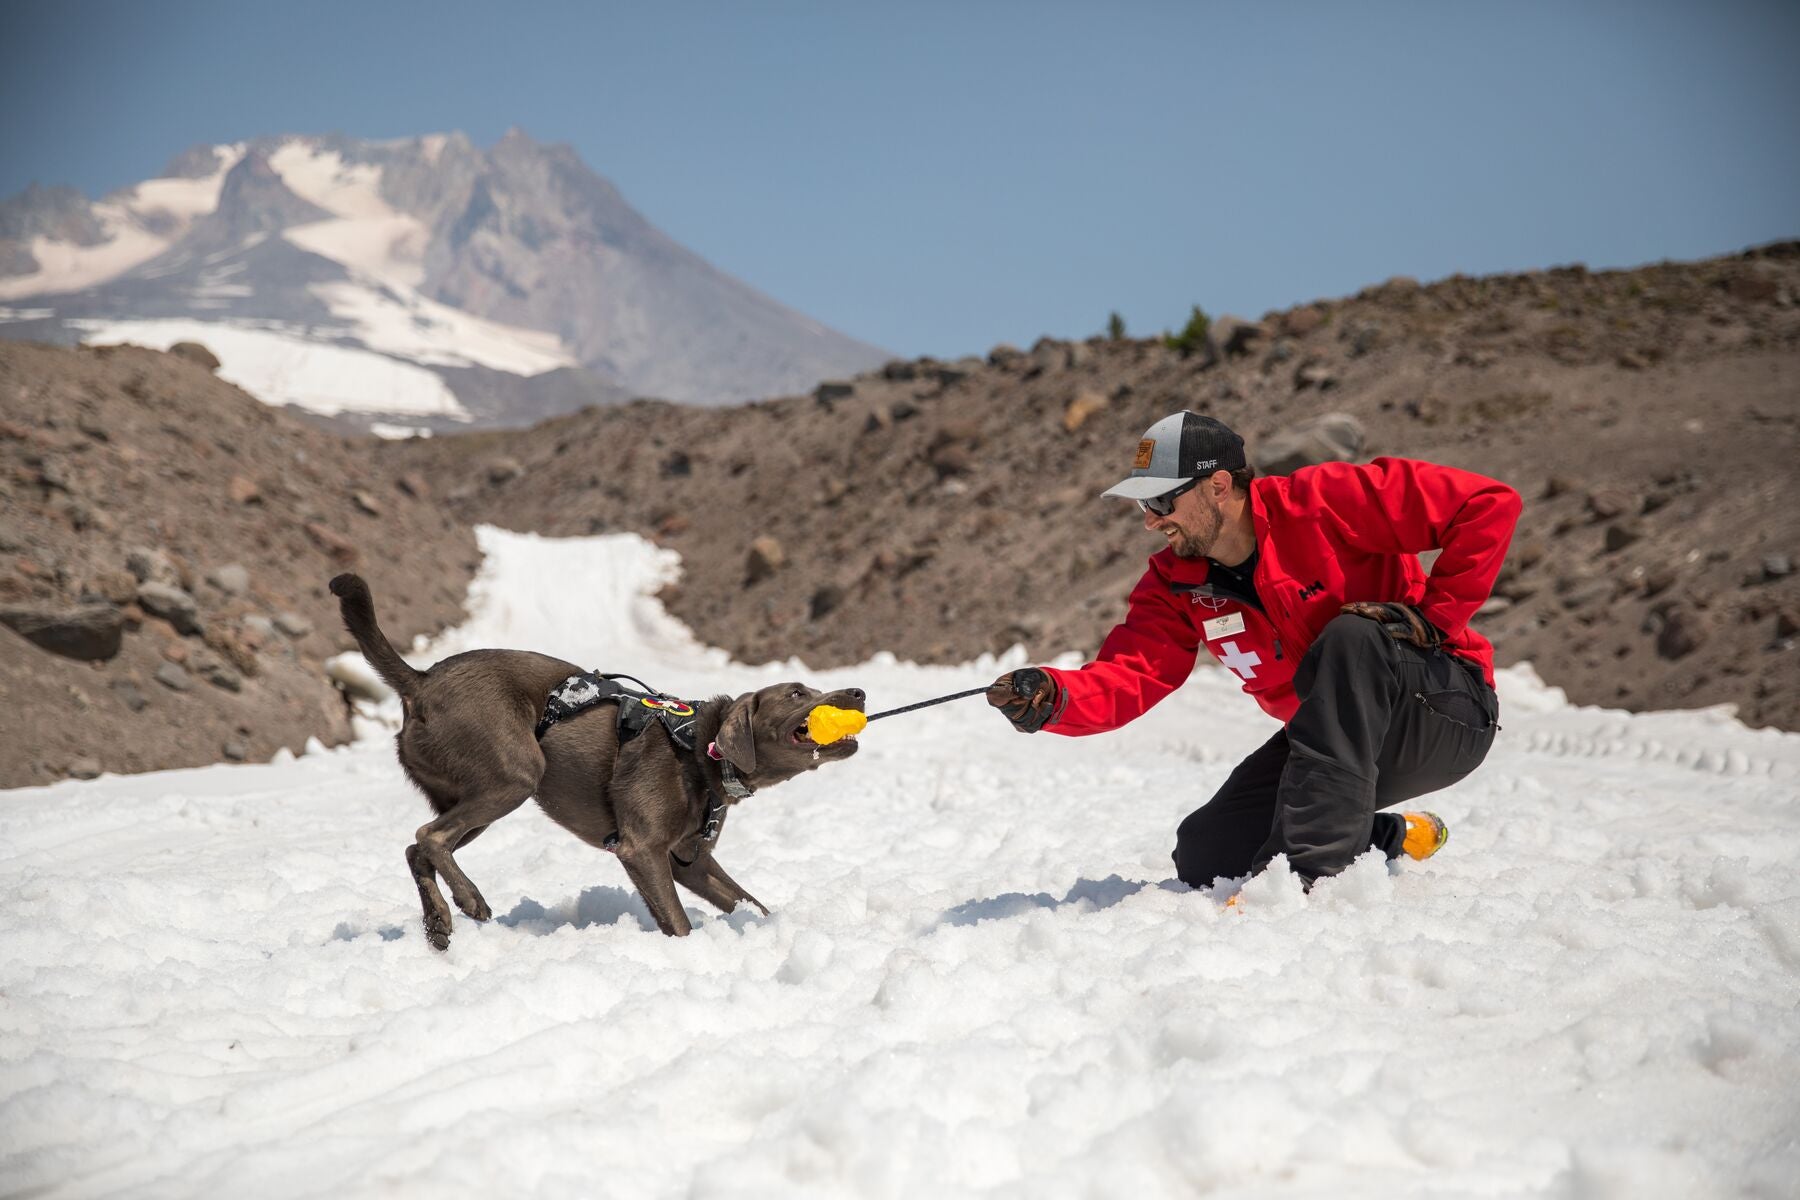 Patroller and dog play tug of war with huck a cone on Mt hood.